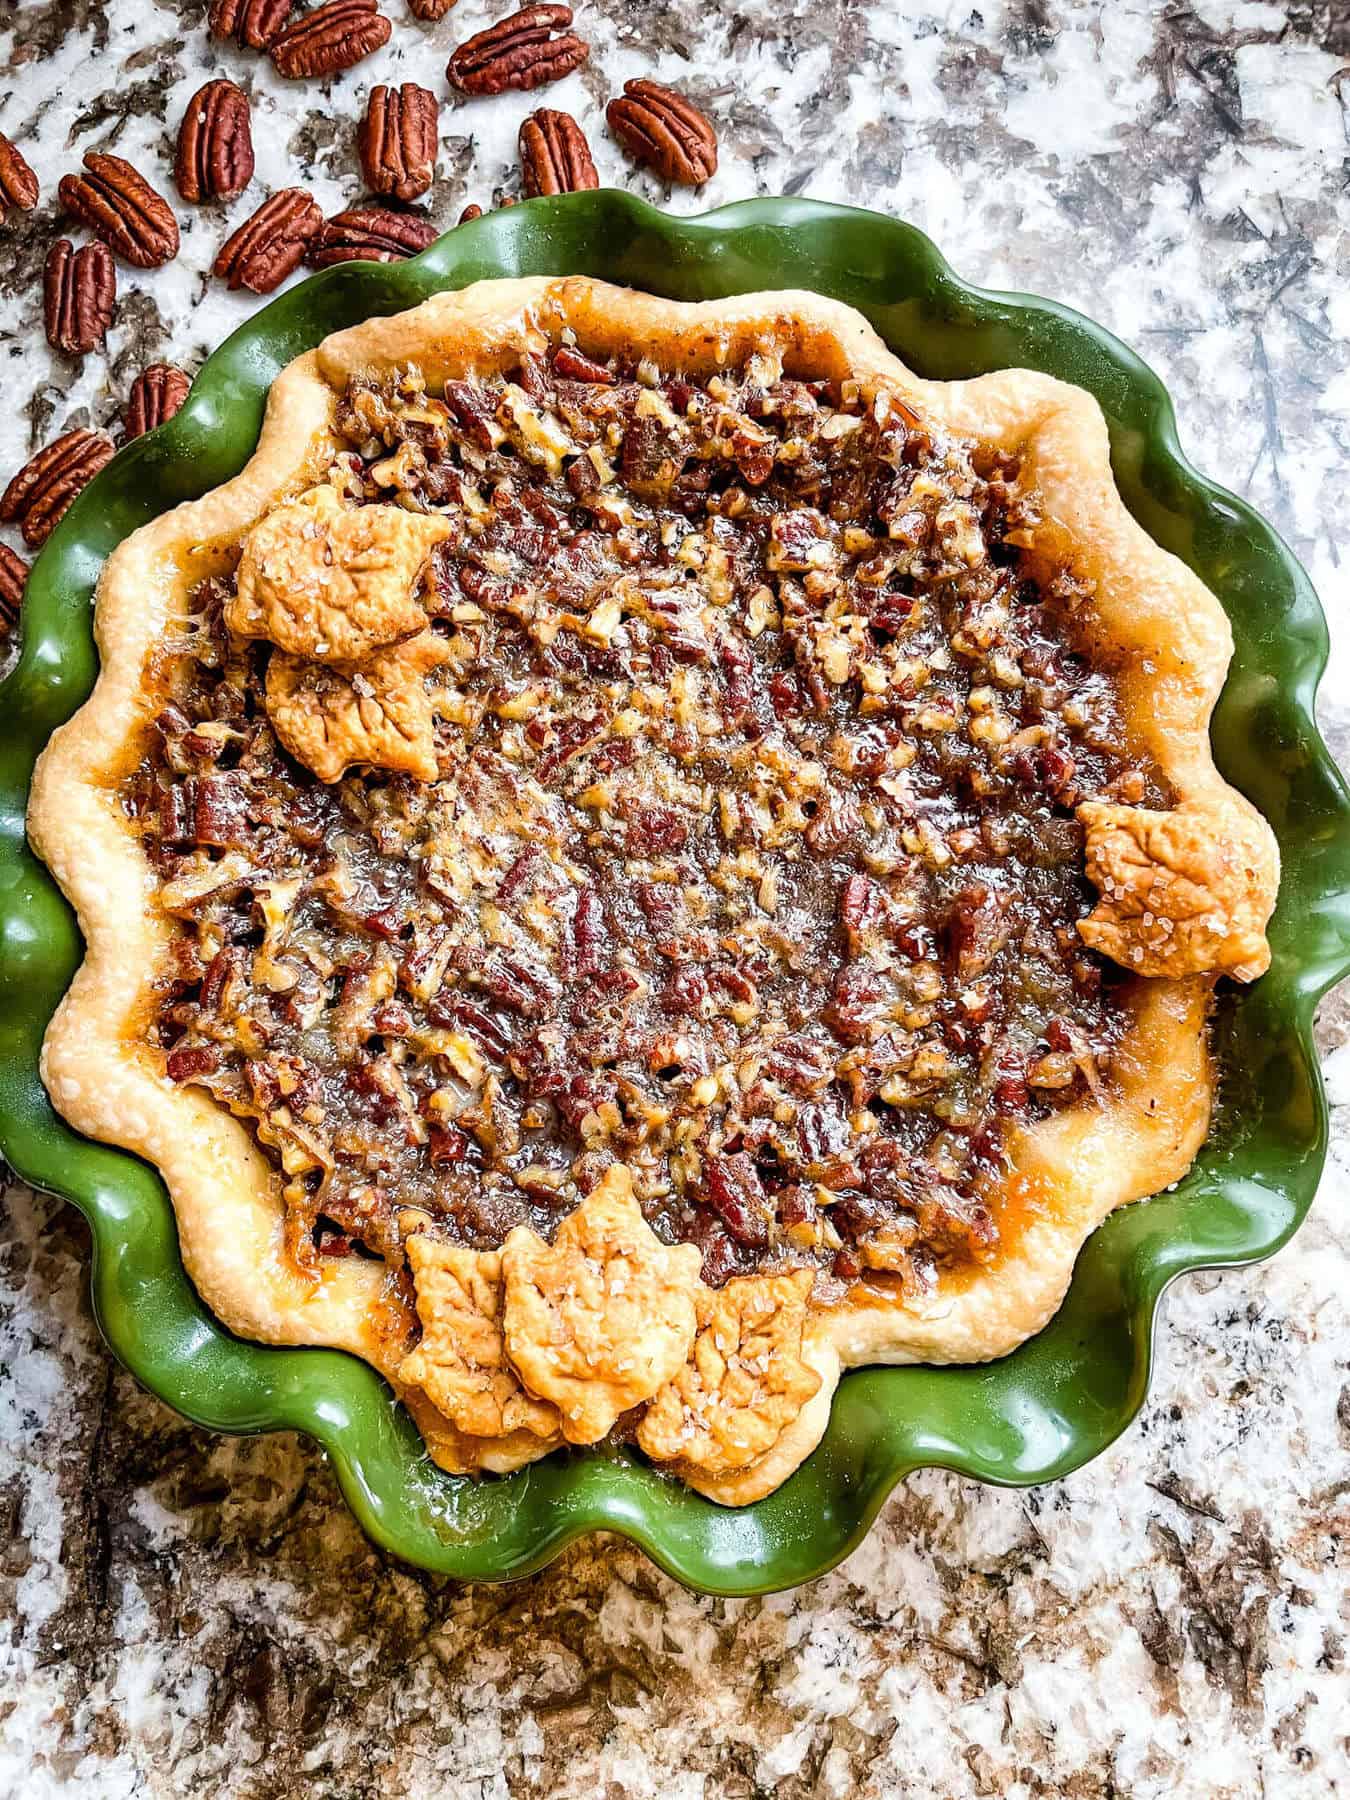 View of an entire Chocolate Bourbon Pecan Pie from the top in a green dish